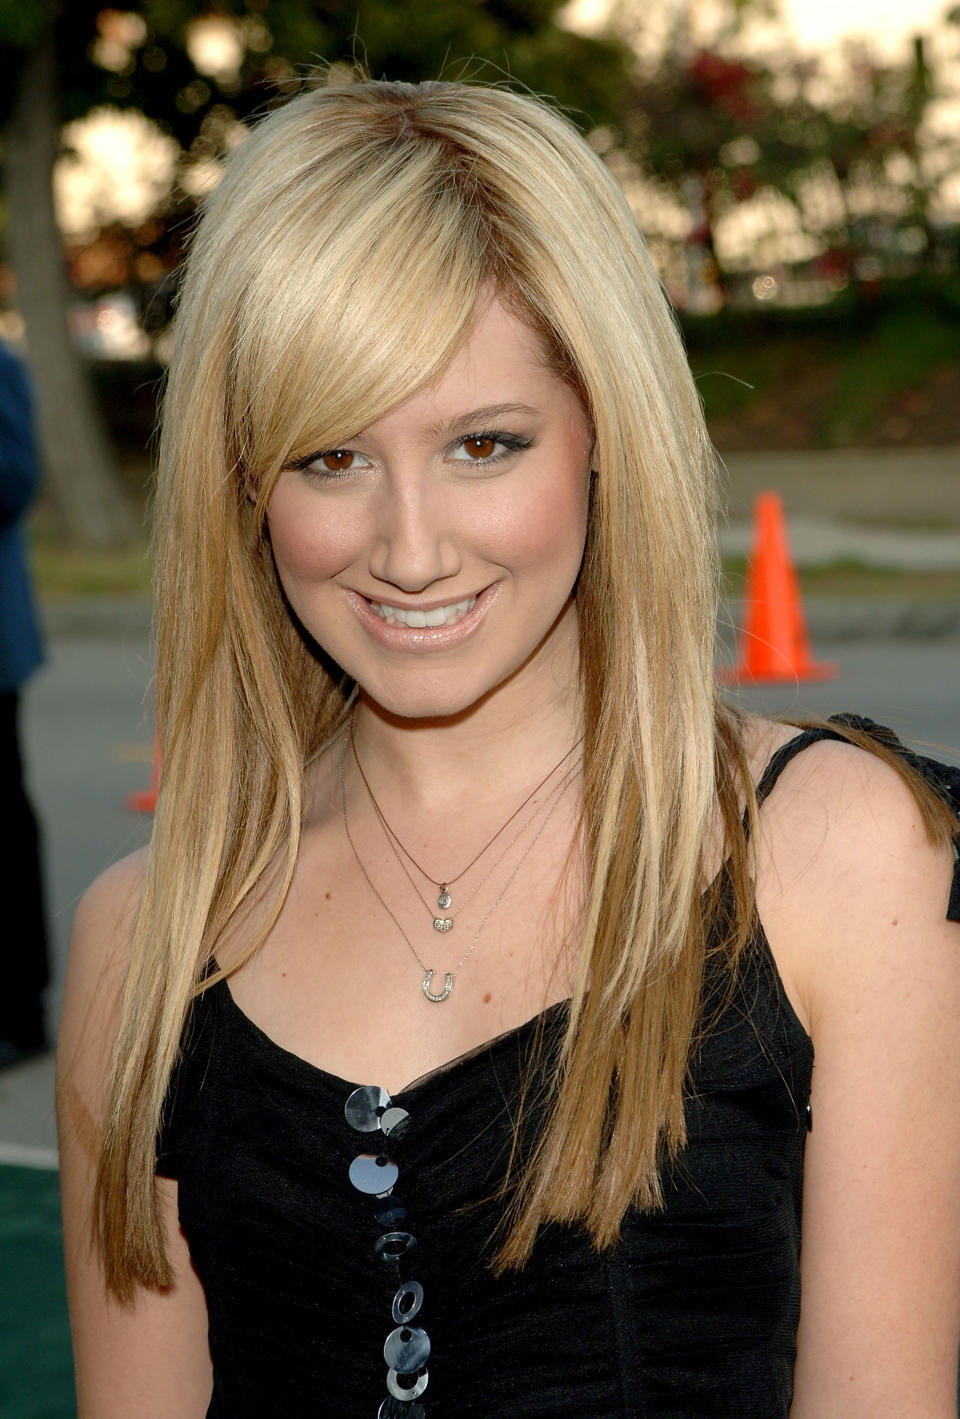 Ashley Tisdale poses at the Environmental Media Awards  on October 19, 2005